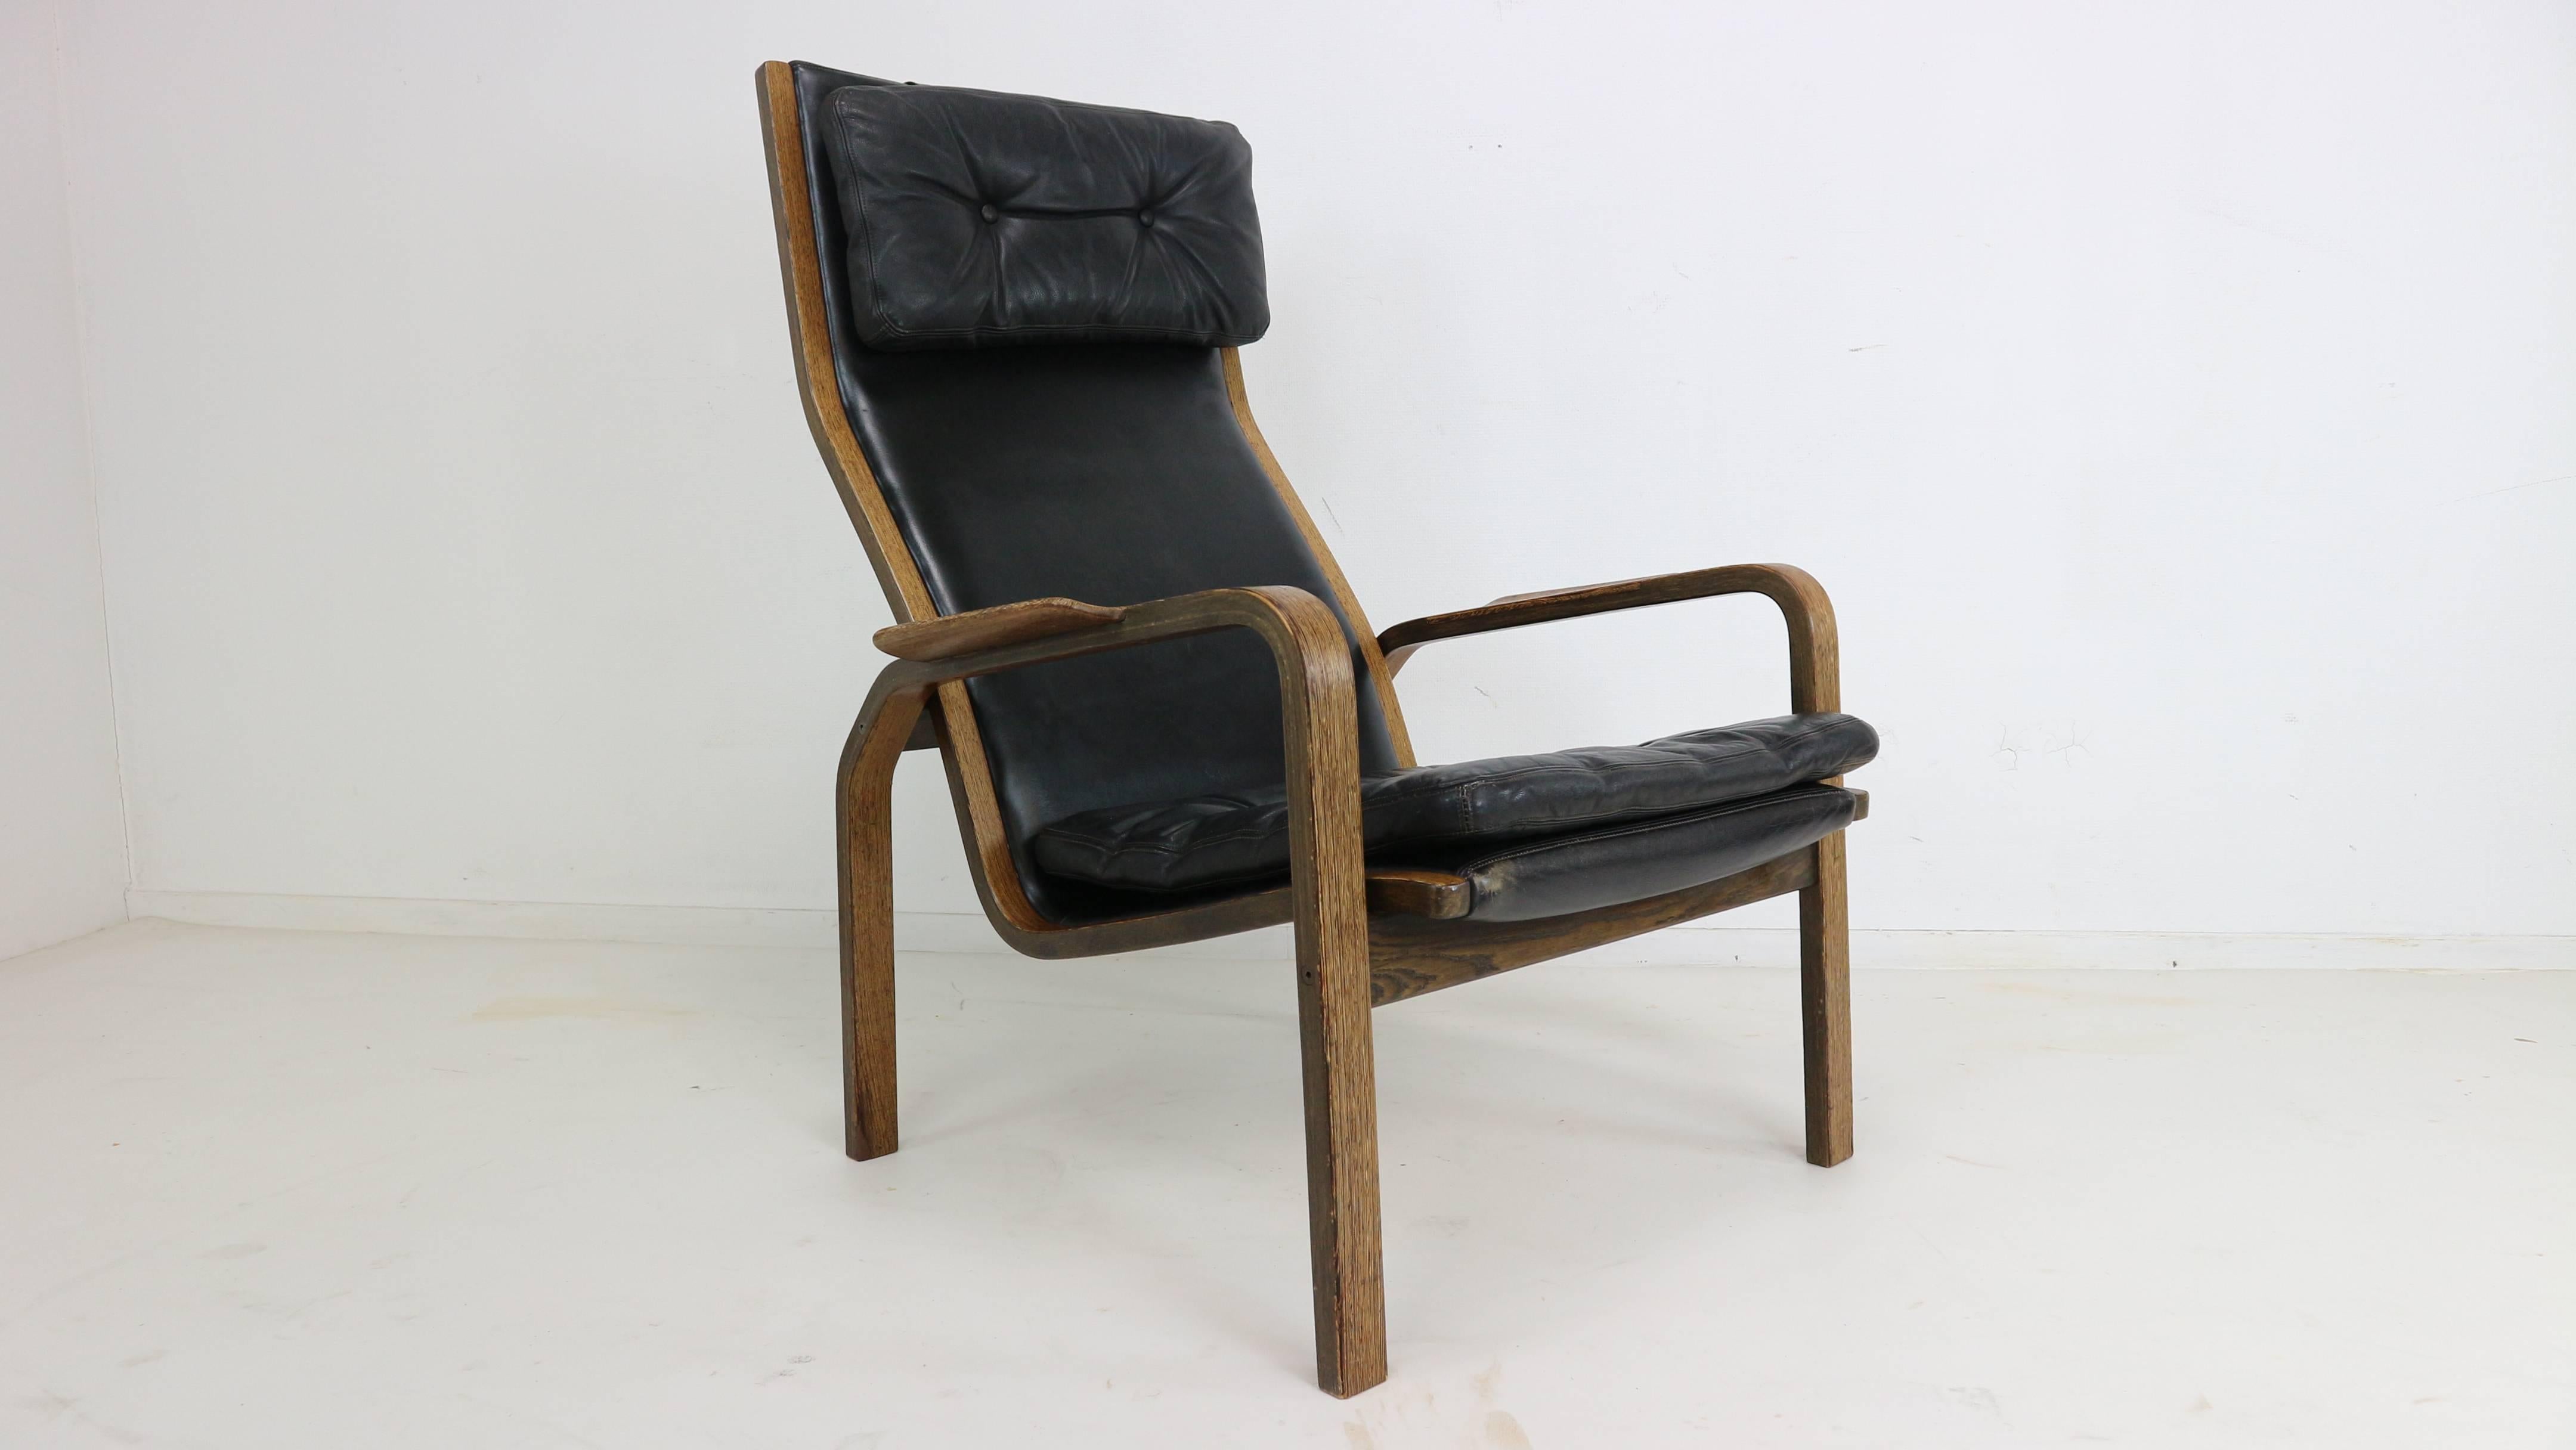 Pair of Scandinavian (Swedish) armchairs manufactured in the 1960s and designed by Yngve Ekstrom. Structure in plywood wengé and black leather. Some marks of wear on the feet. The chairs are marked by the maker.